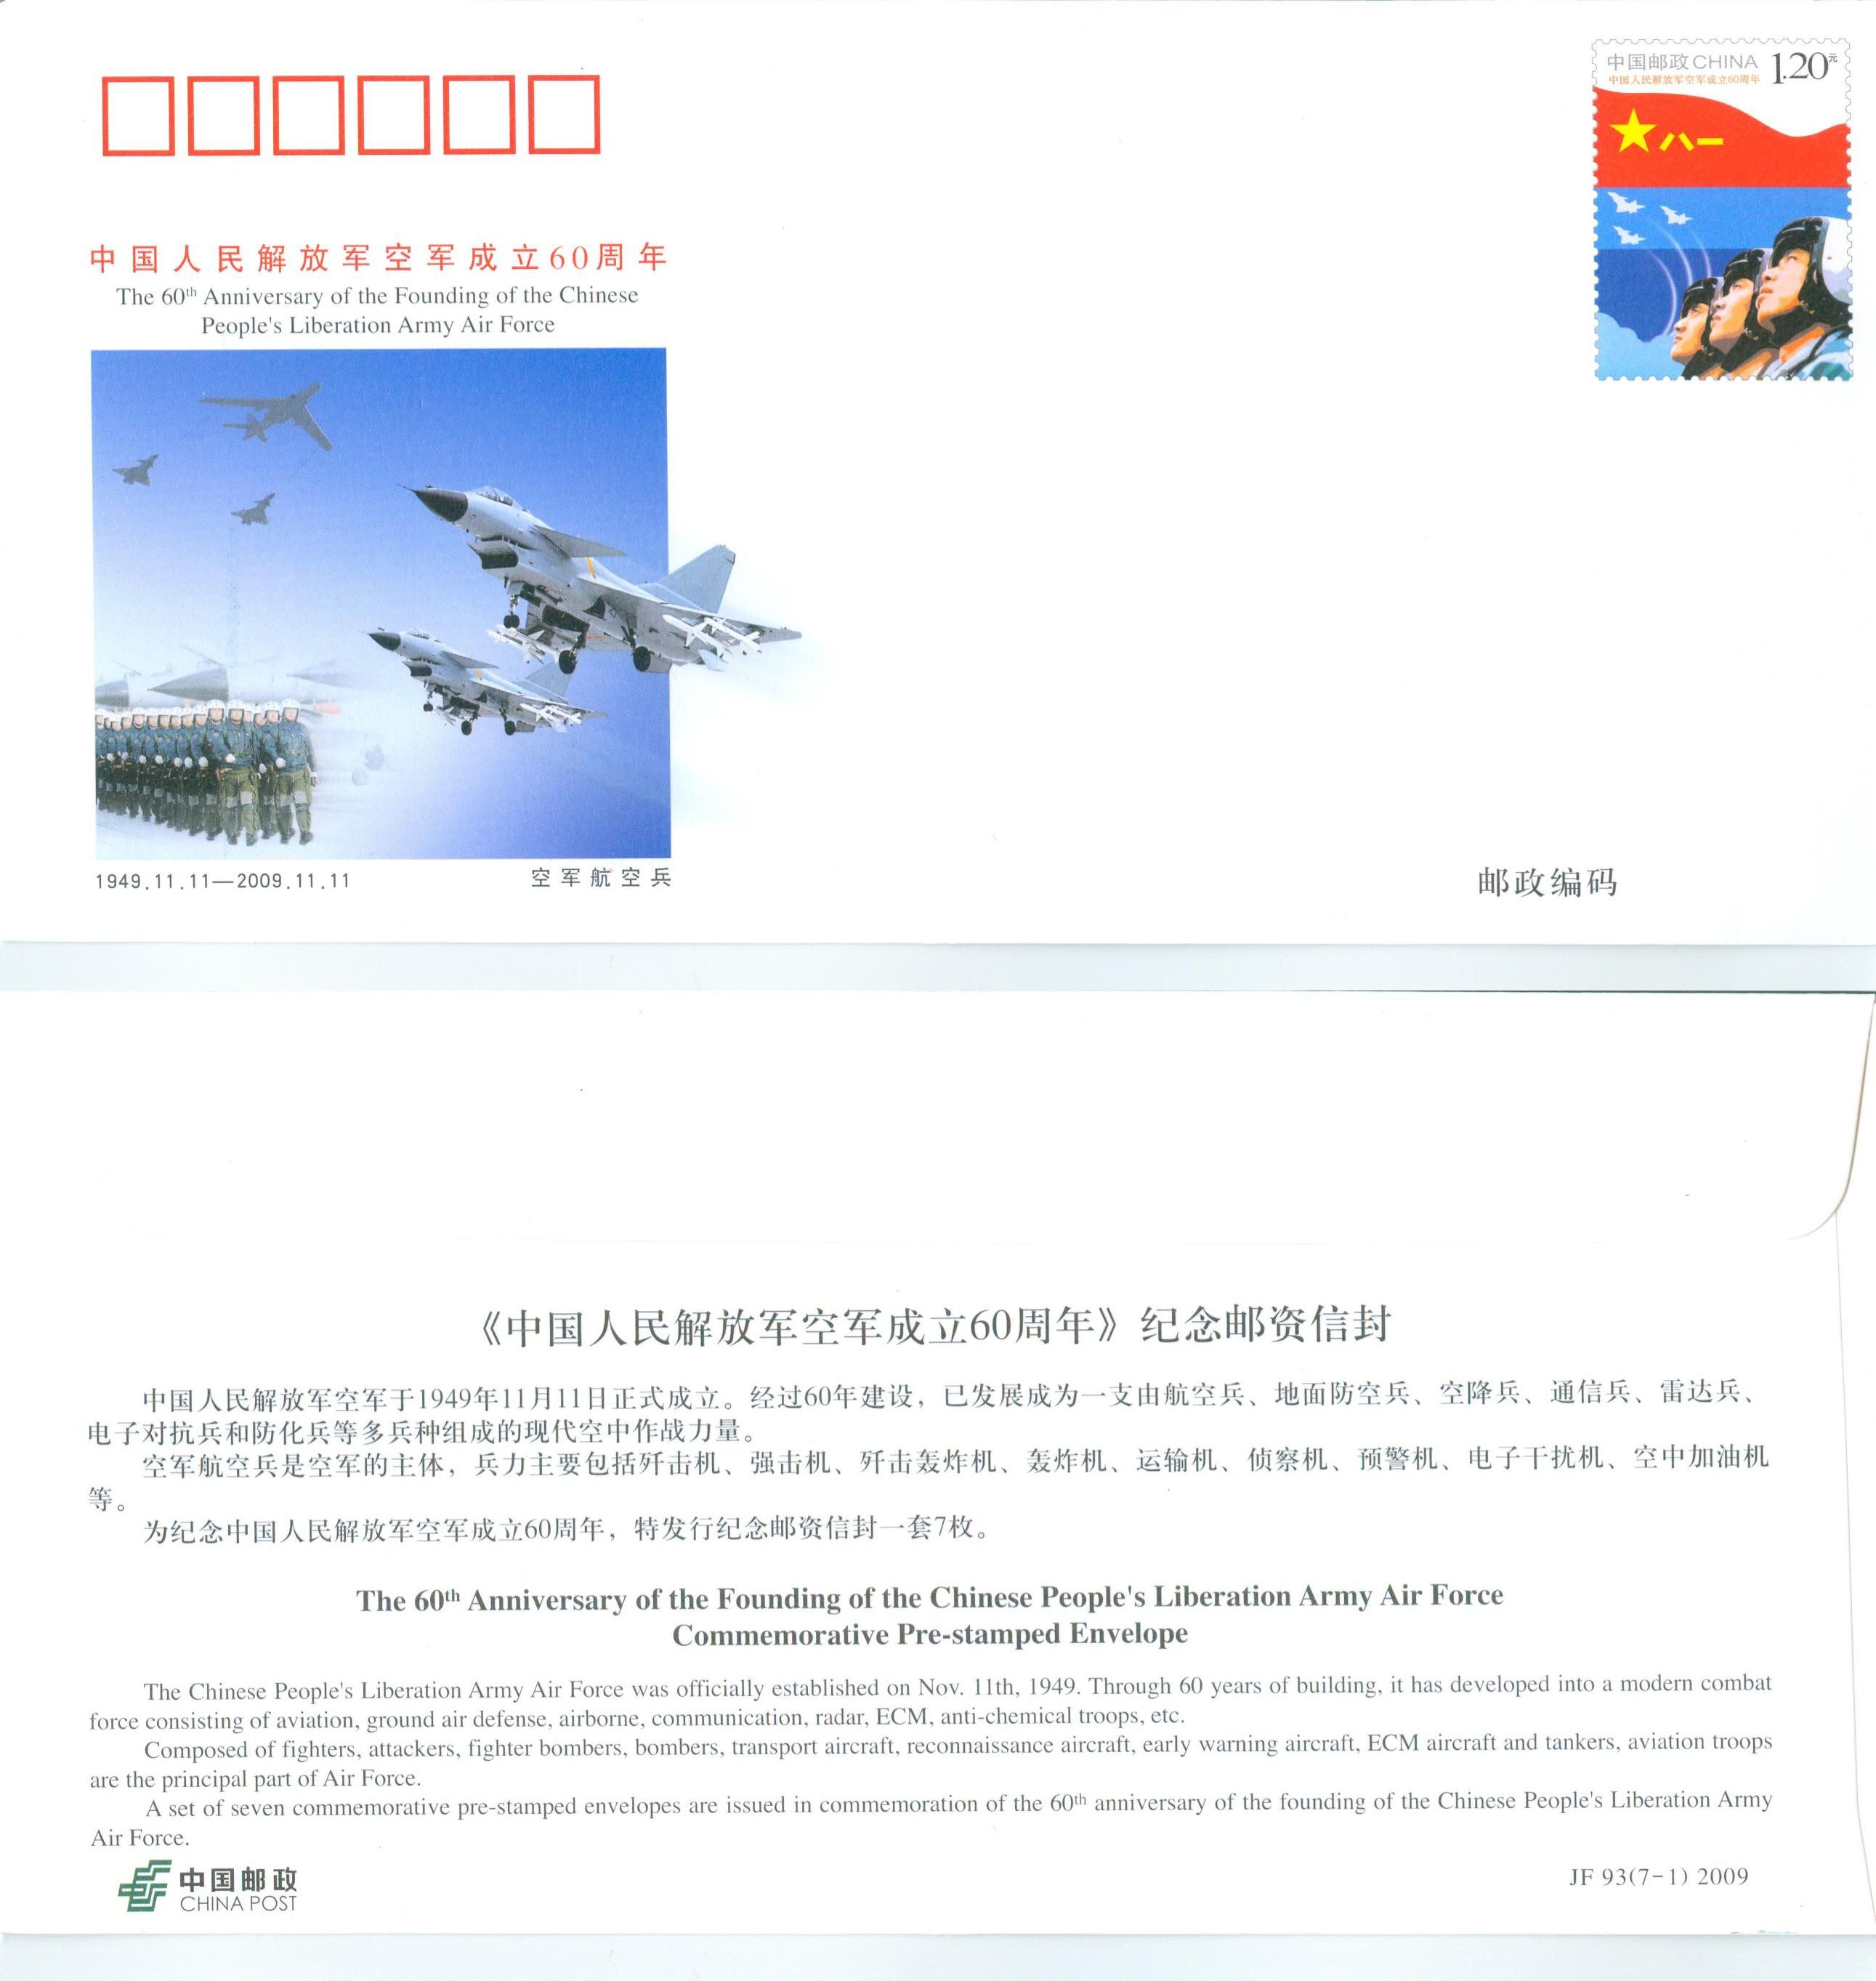 JF93 60th Anniversary of the Founding of the Chinese PLA Air Force 2009